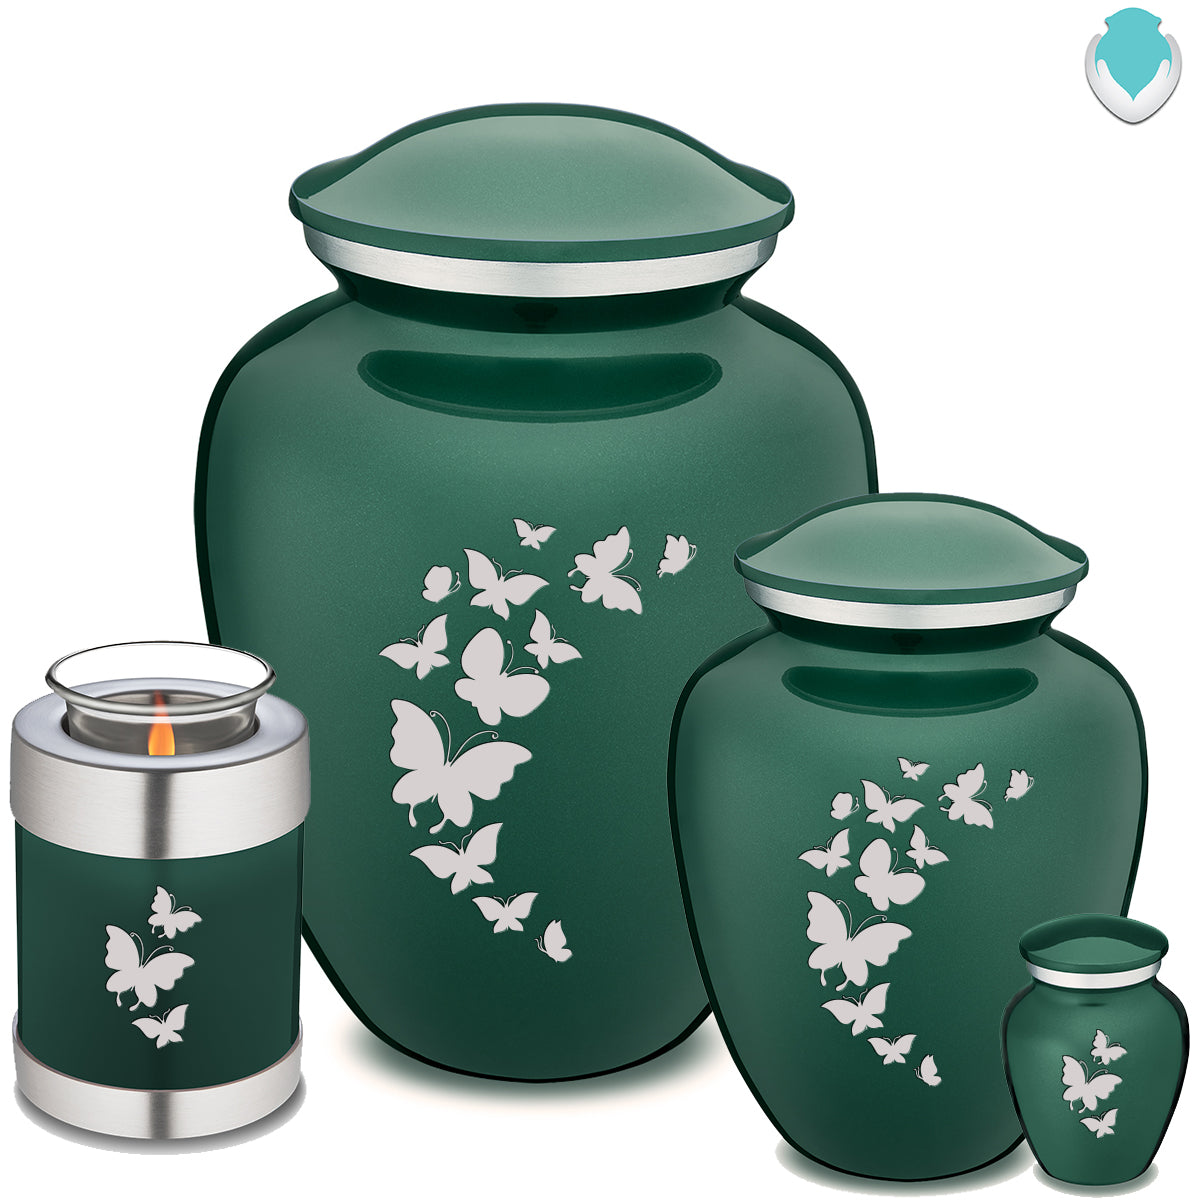 Adult Embrace Green Butterfly Cremation Urn